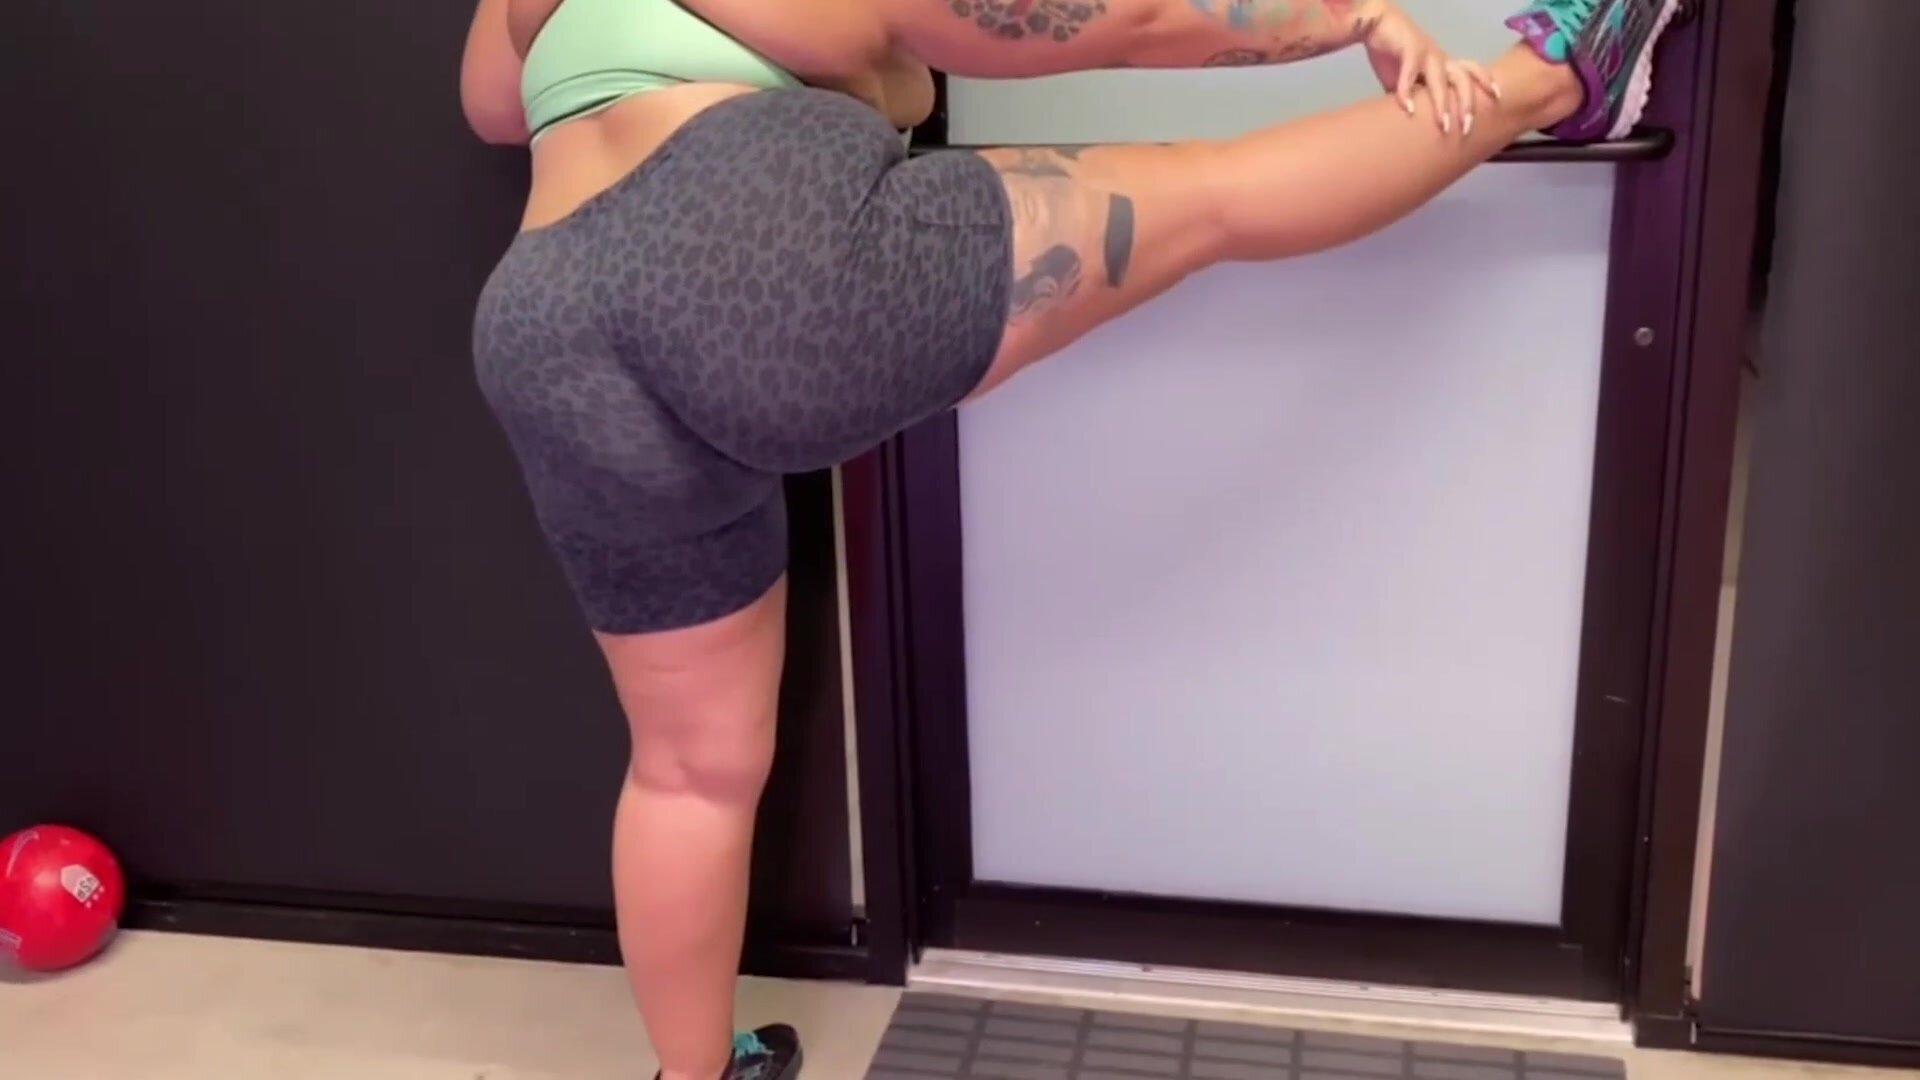 Fatty in Yoga Pants Exercising